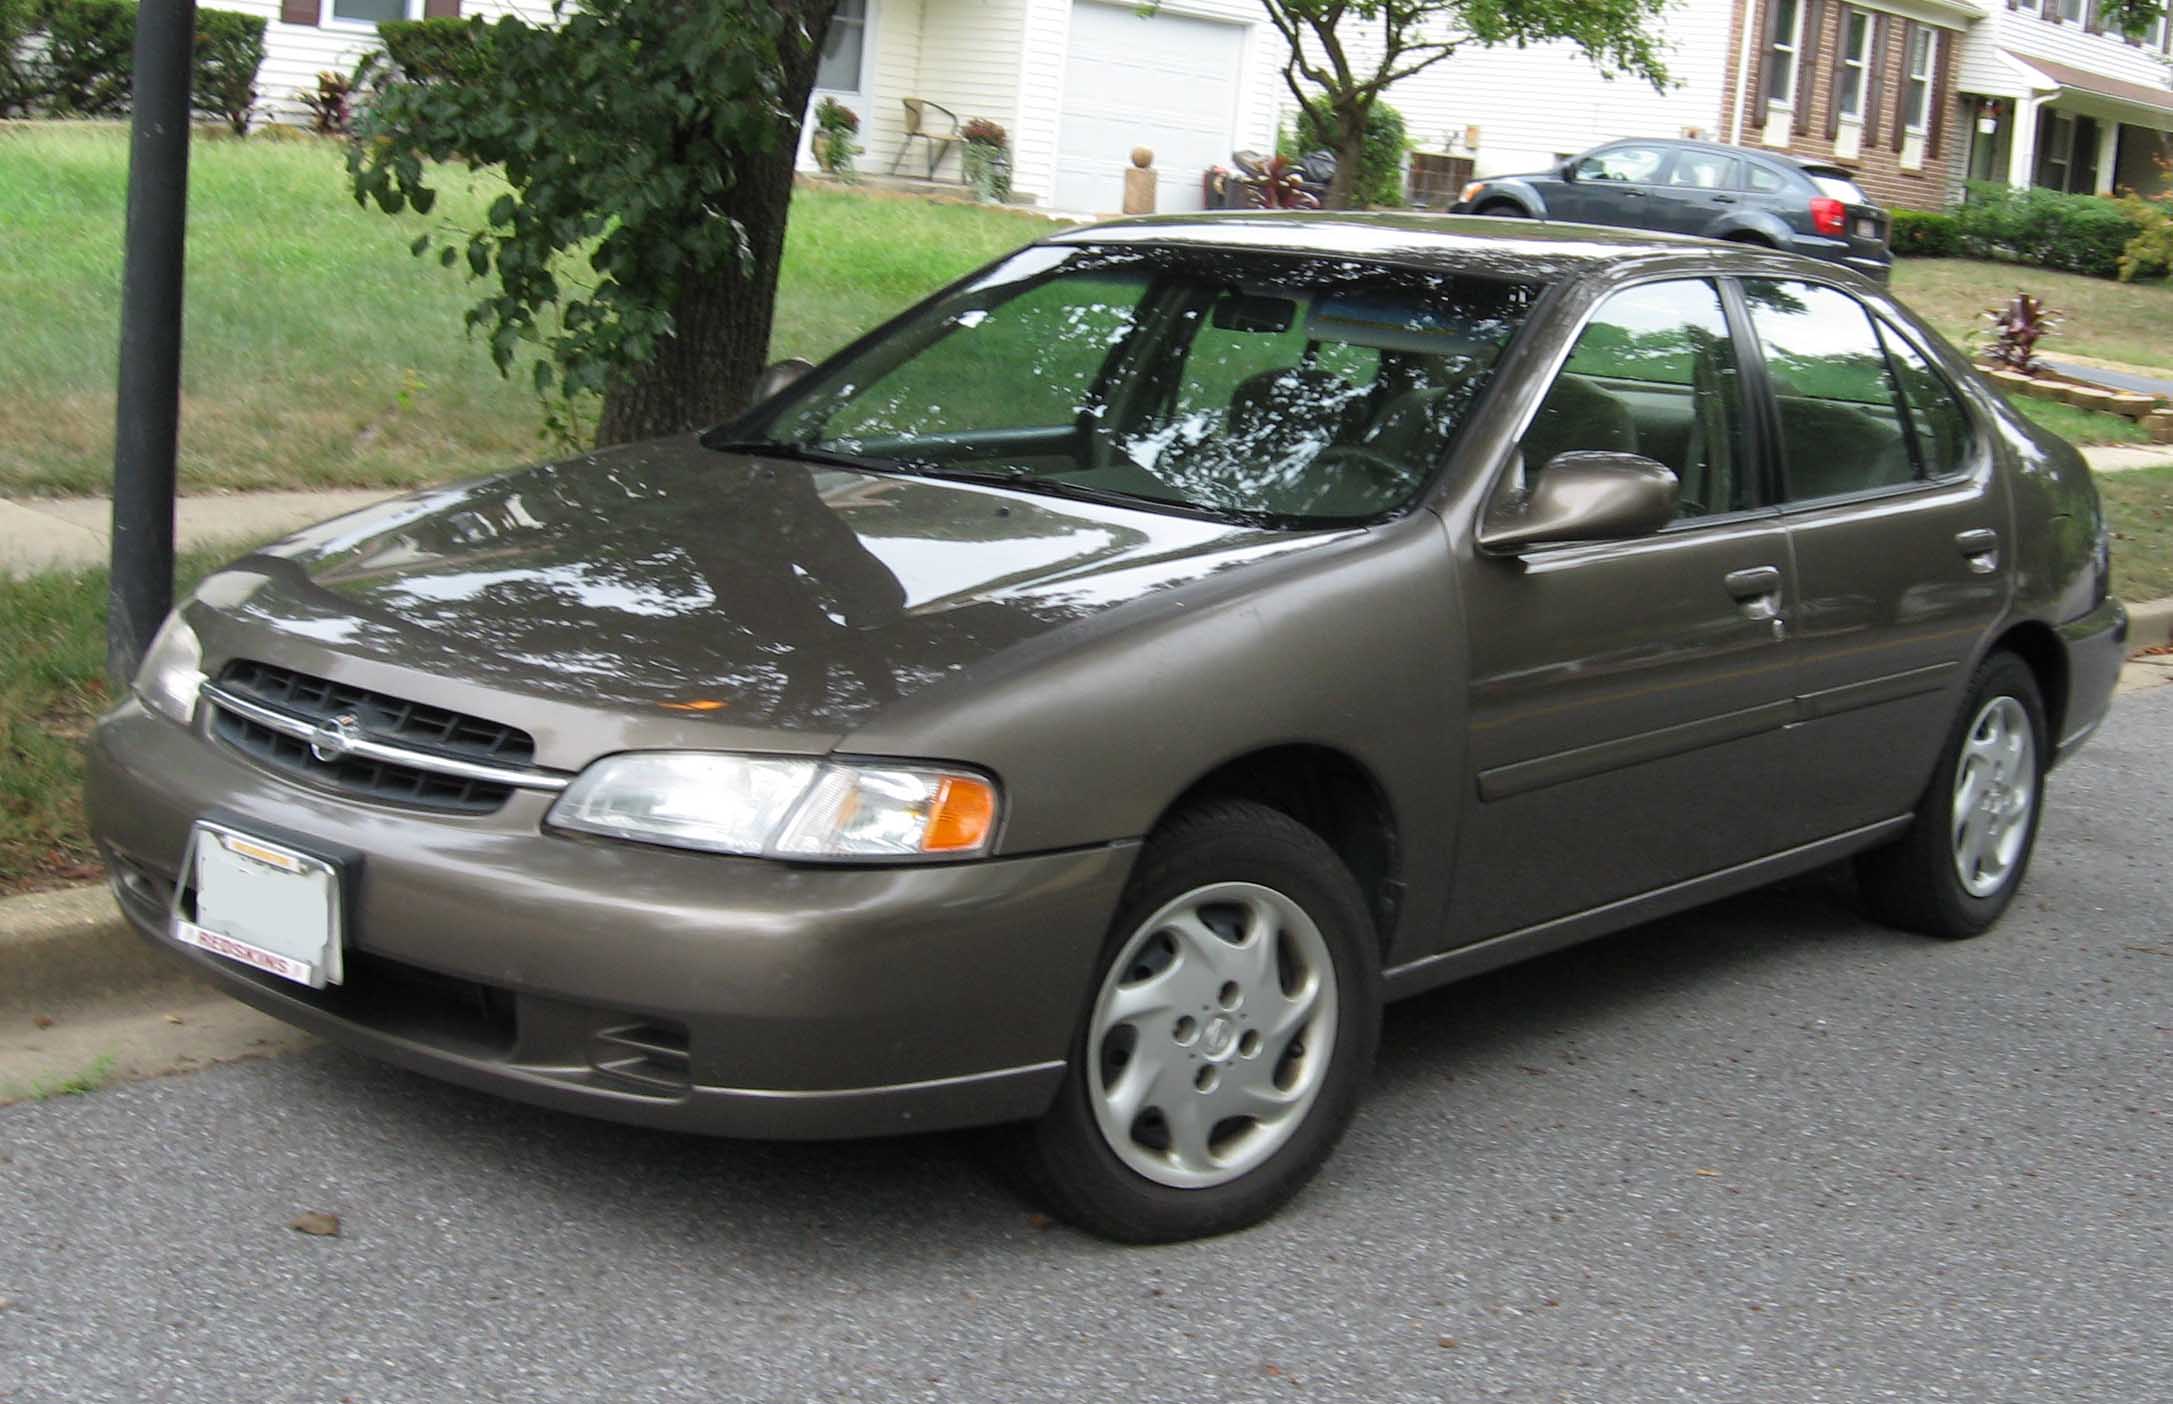 98 1998 Nissan Altima owners manual 